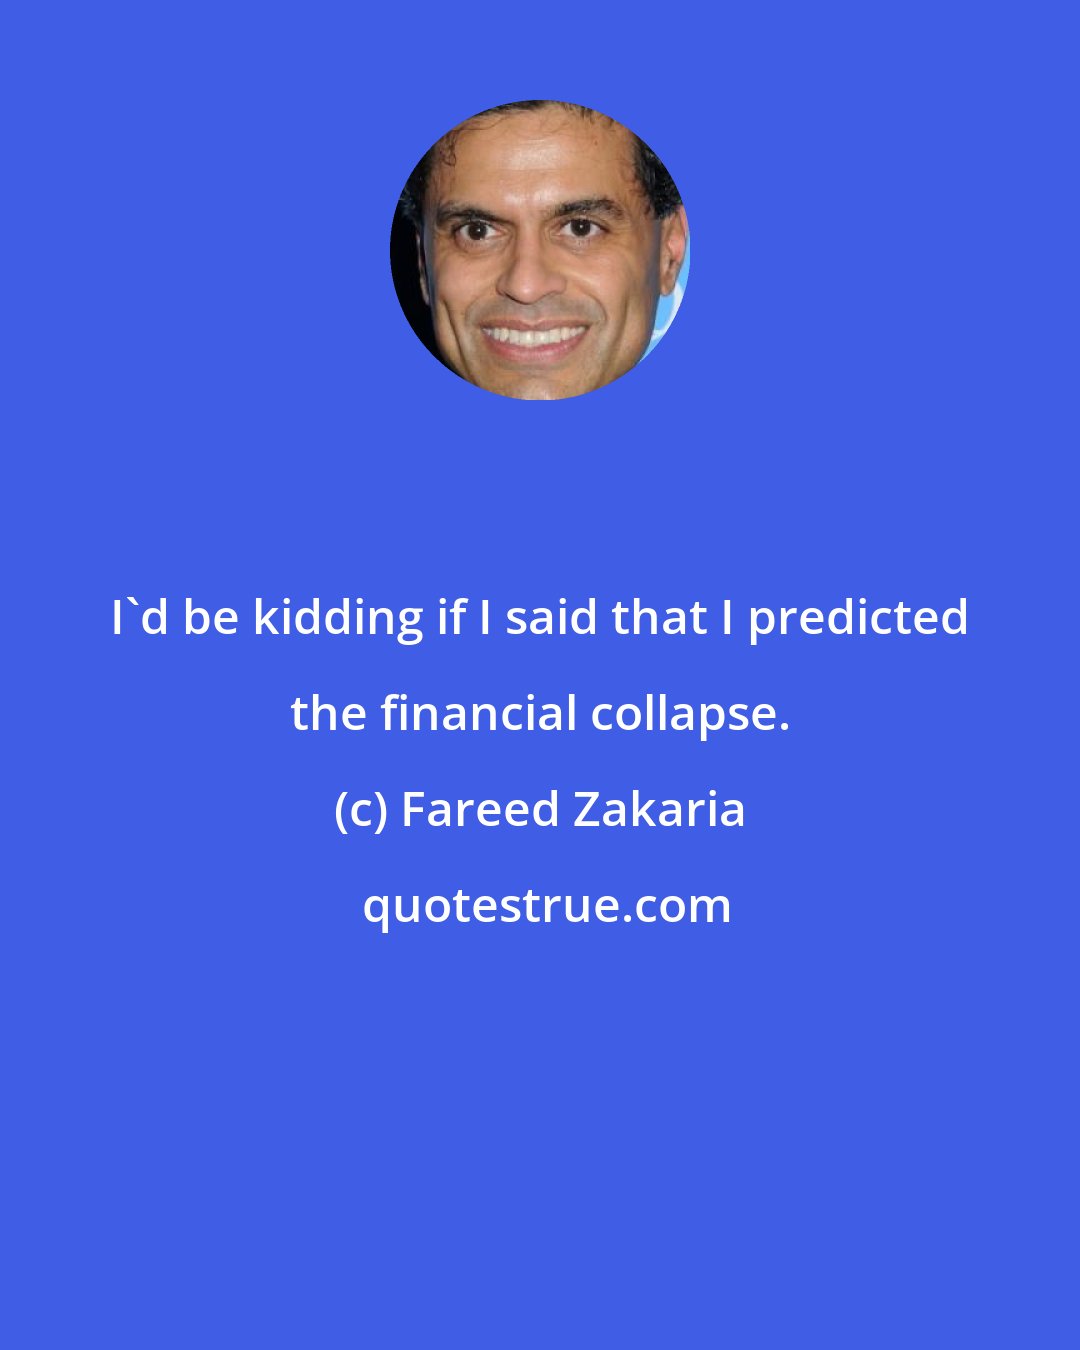 Fareed Zakaria: I'd be kidding if I said that I predicted the financial collapse.